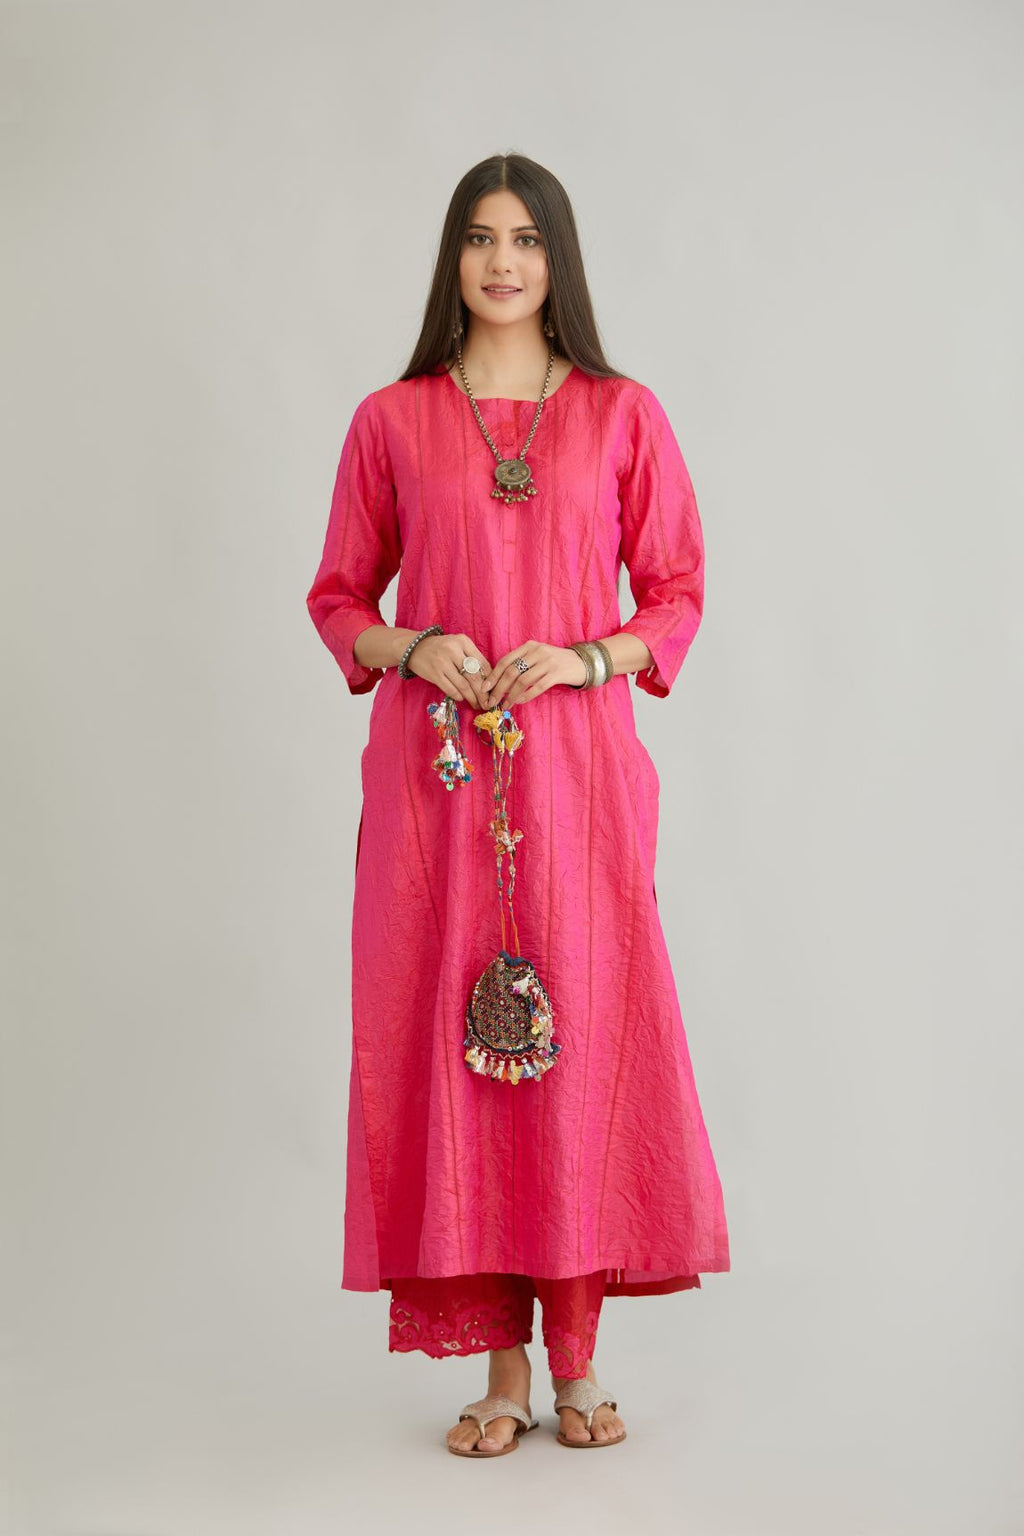 Fuchsia hand crushed silk straight kurta set with vertical organza fabric inset stripe detail in front, back and 3/4 sleeves, highlighted with contrasting top stitch.